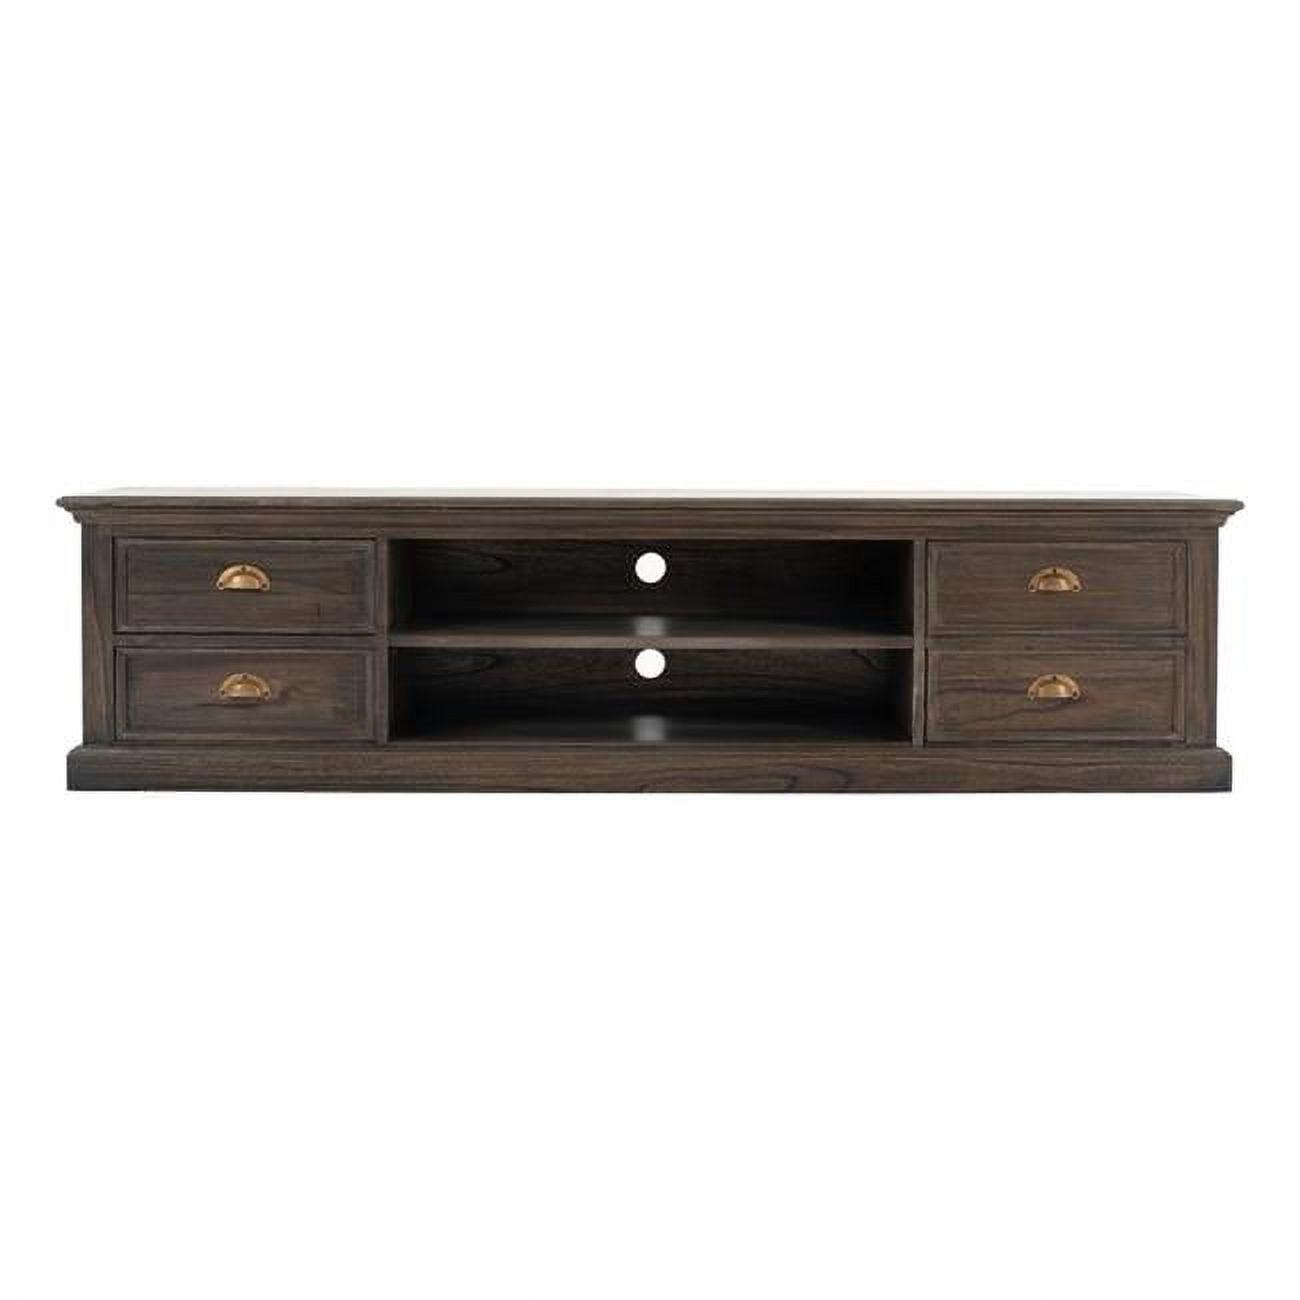 Halifax Mindi Black Wash Rustic Low Profile TV Stand with Cabinet